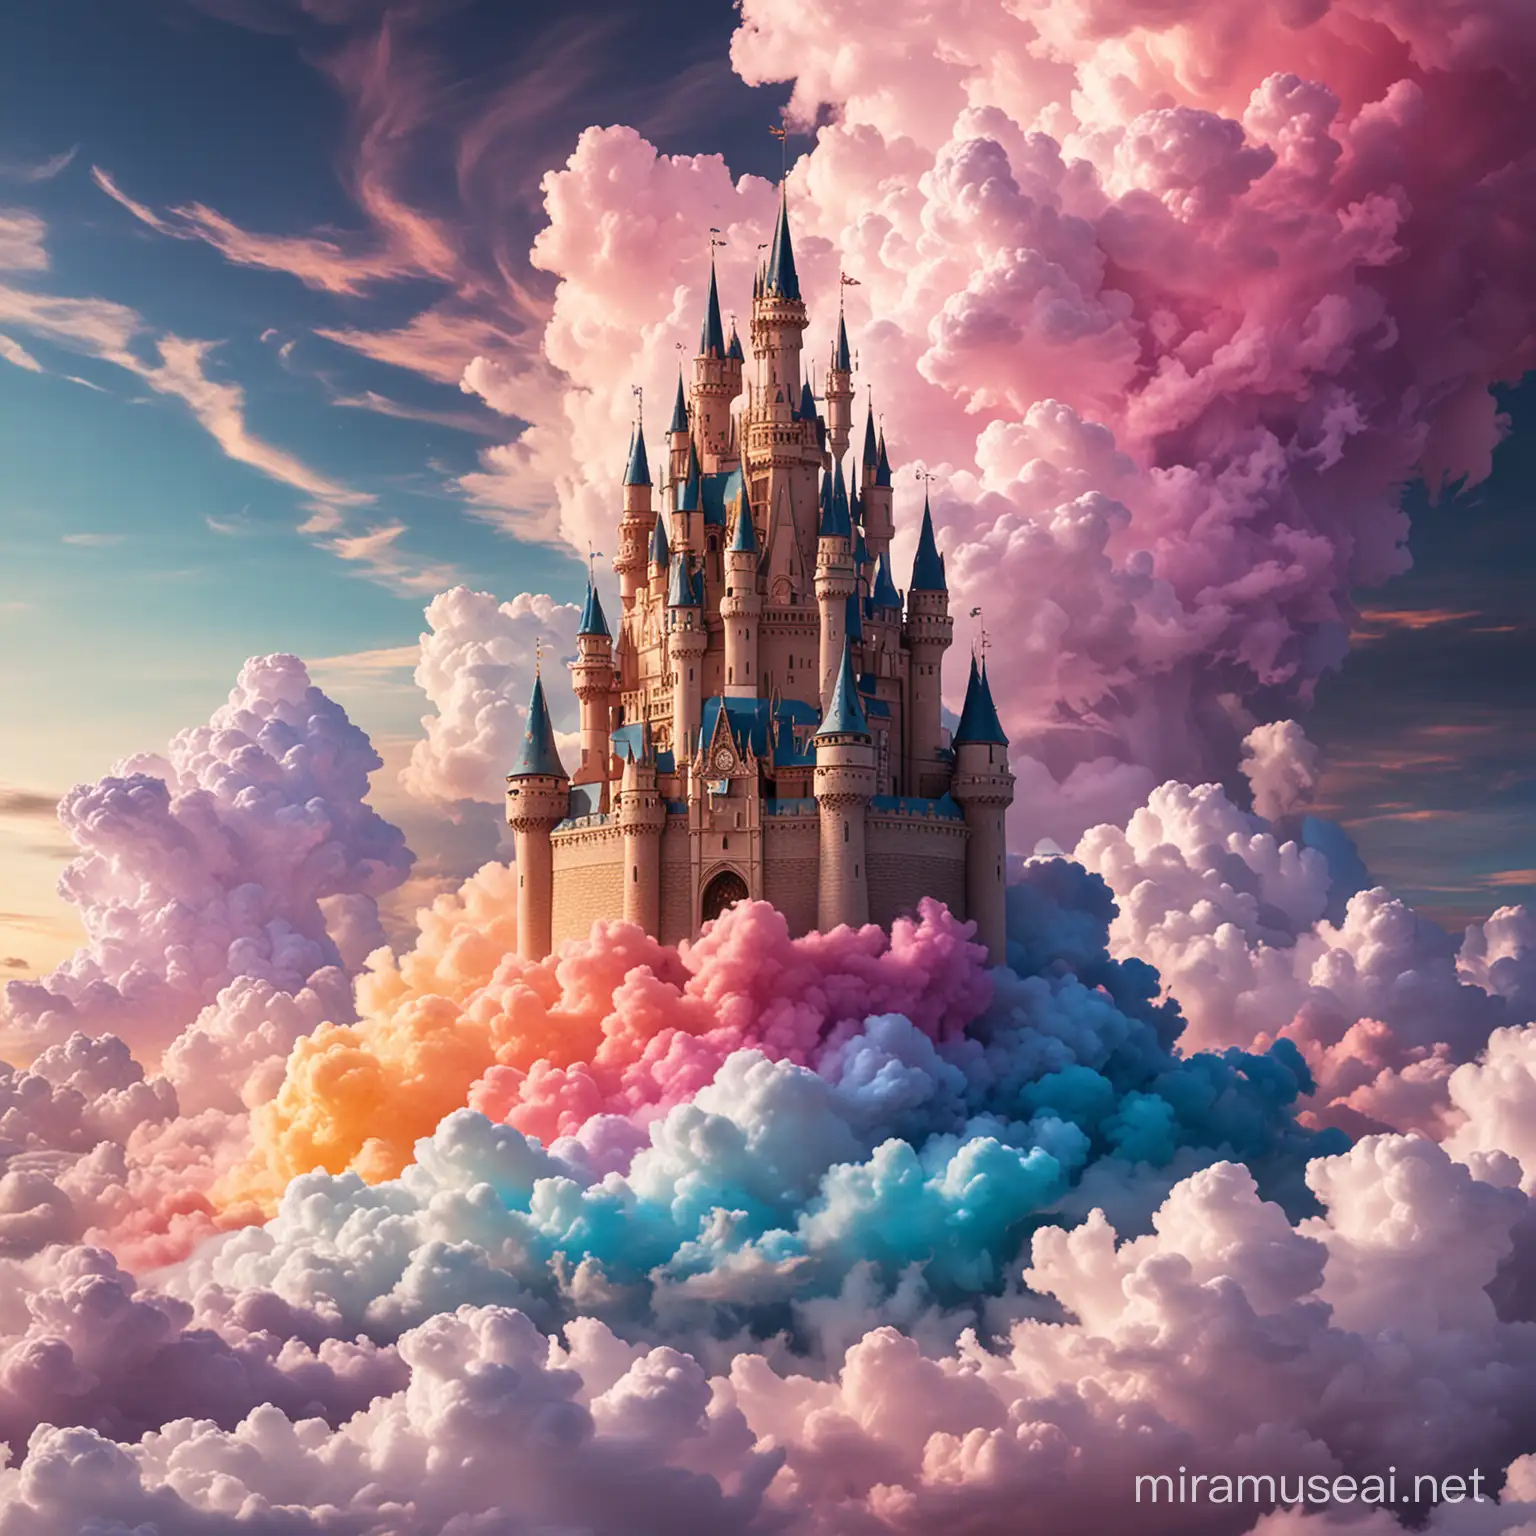 A castle made from colourful clouds